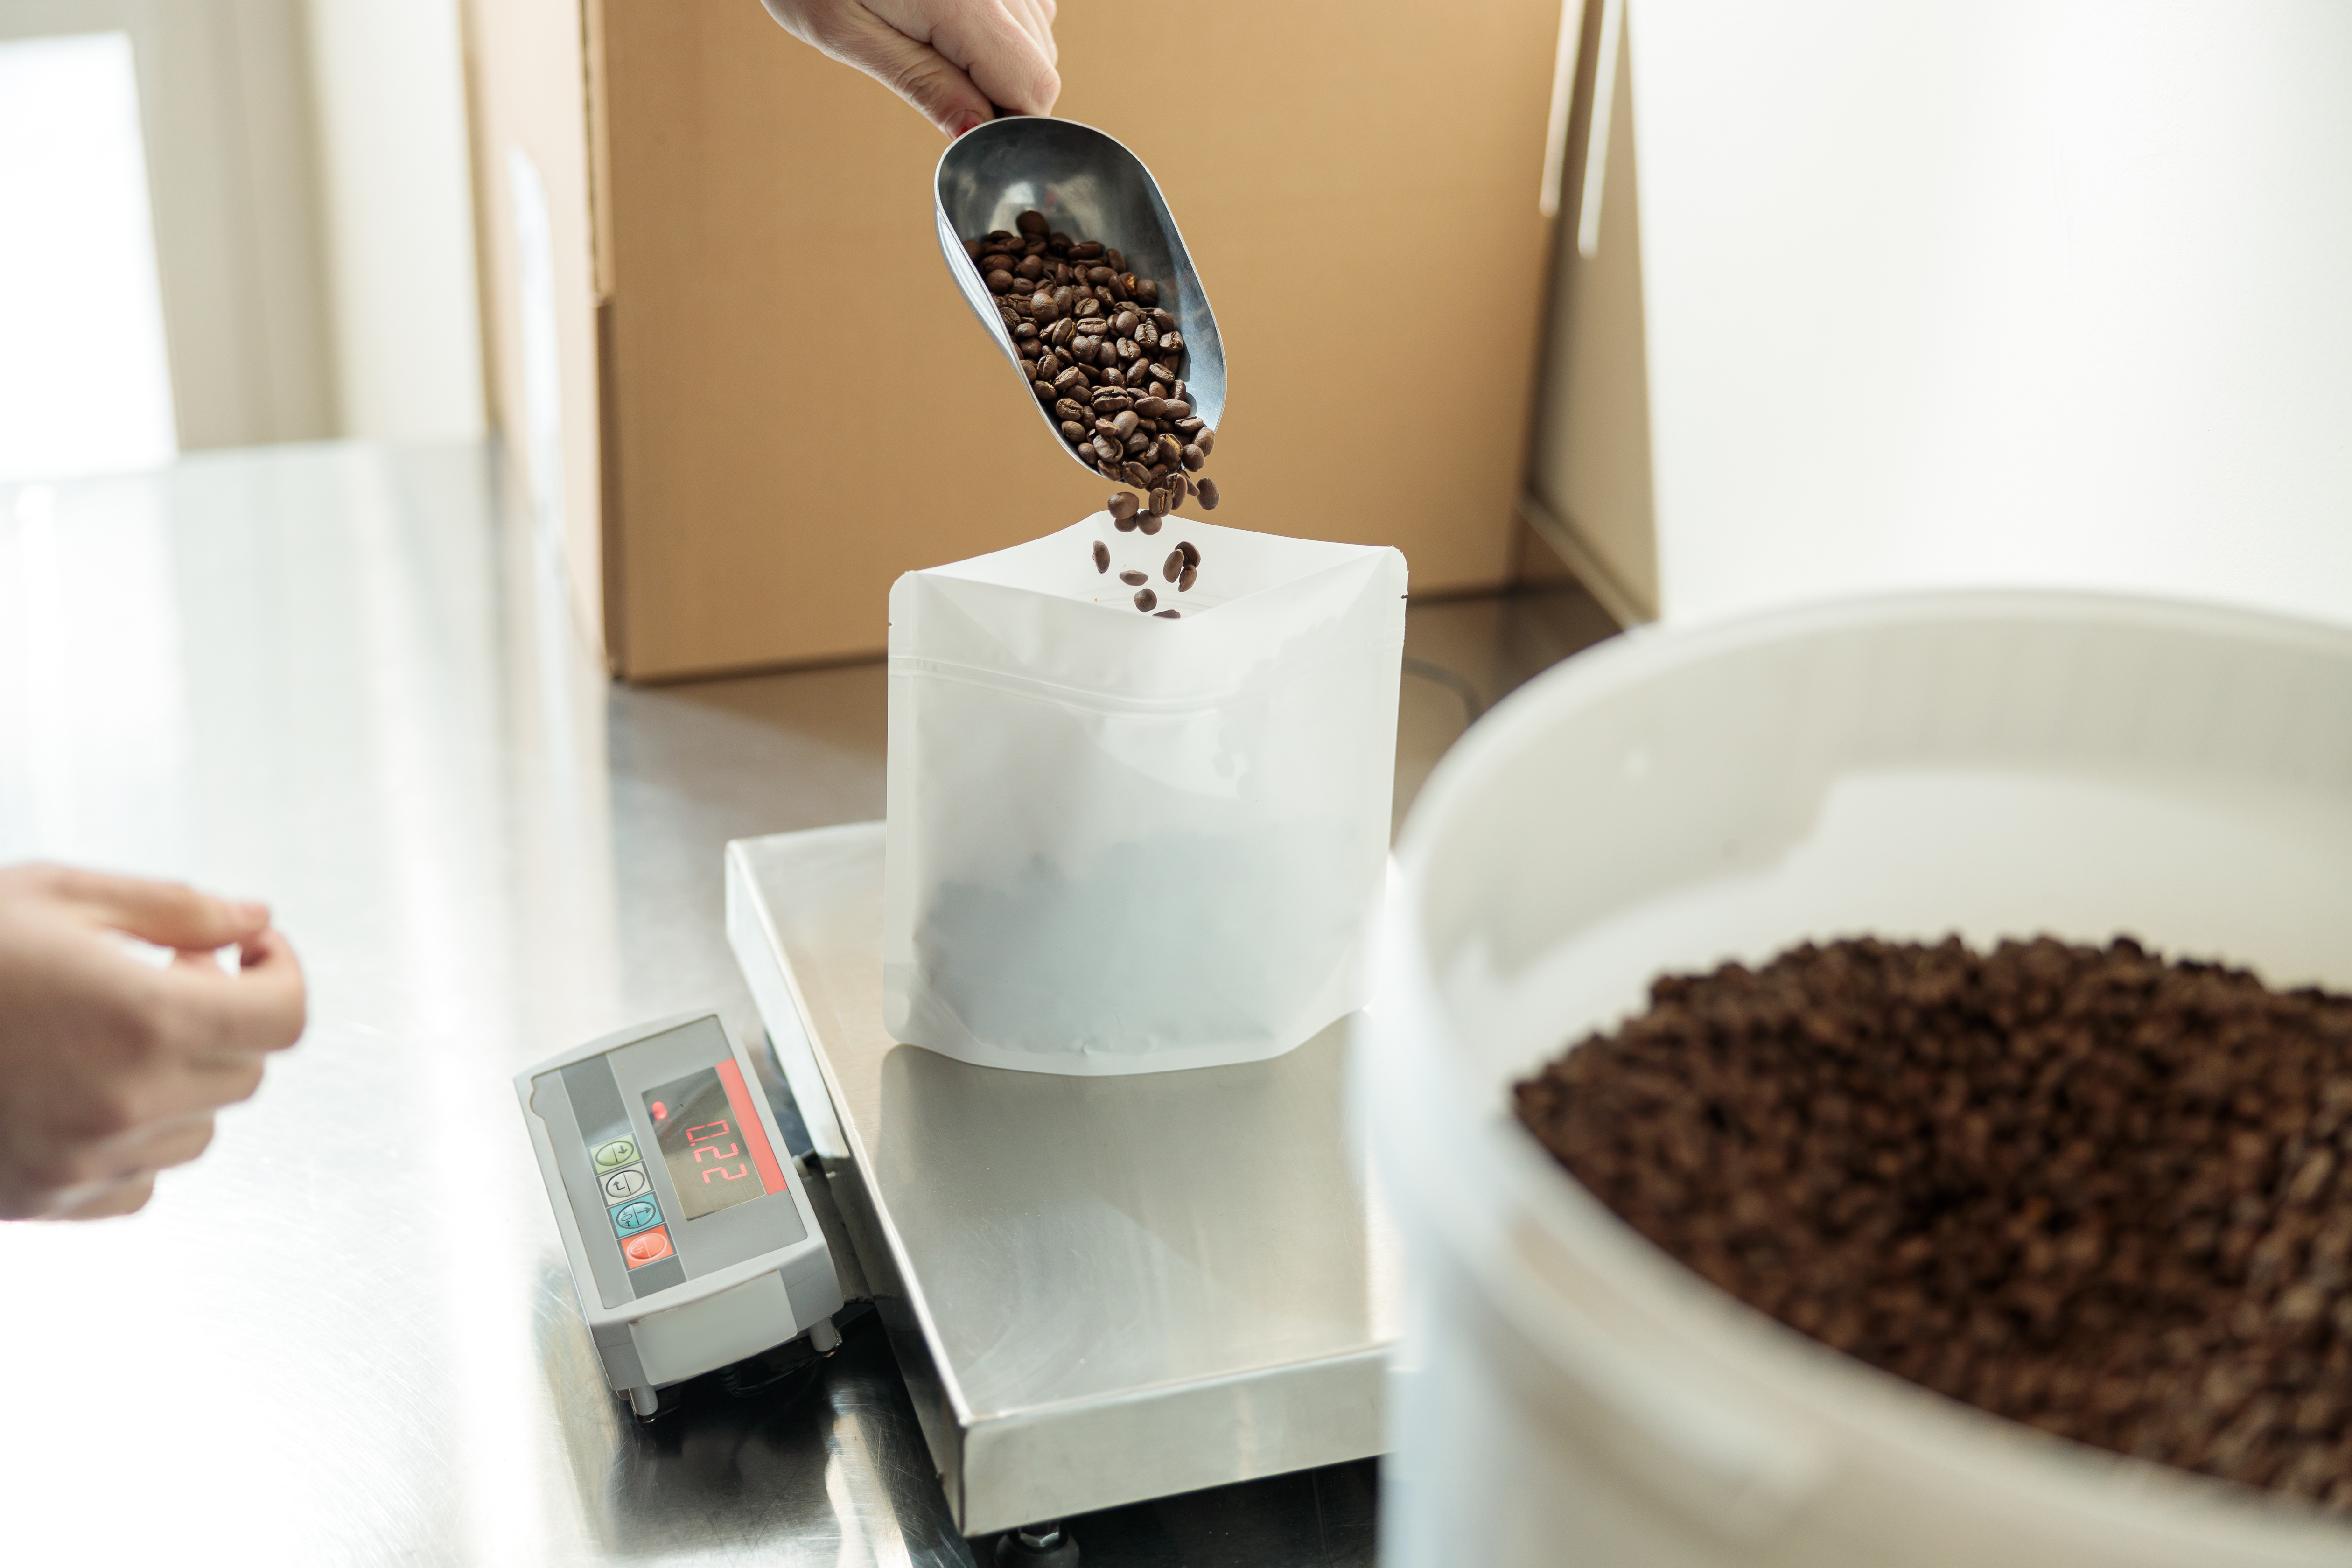 Coffee beans added to scale for weighing